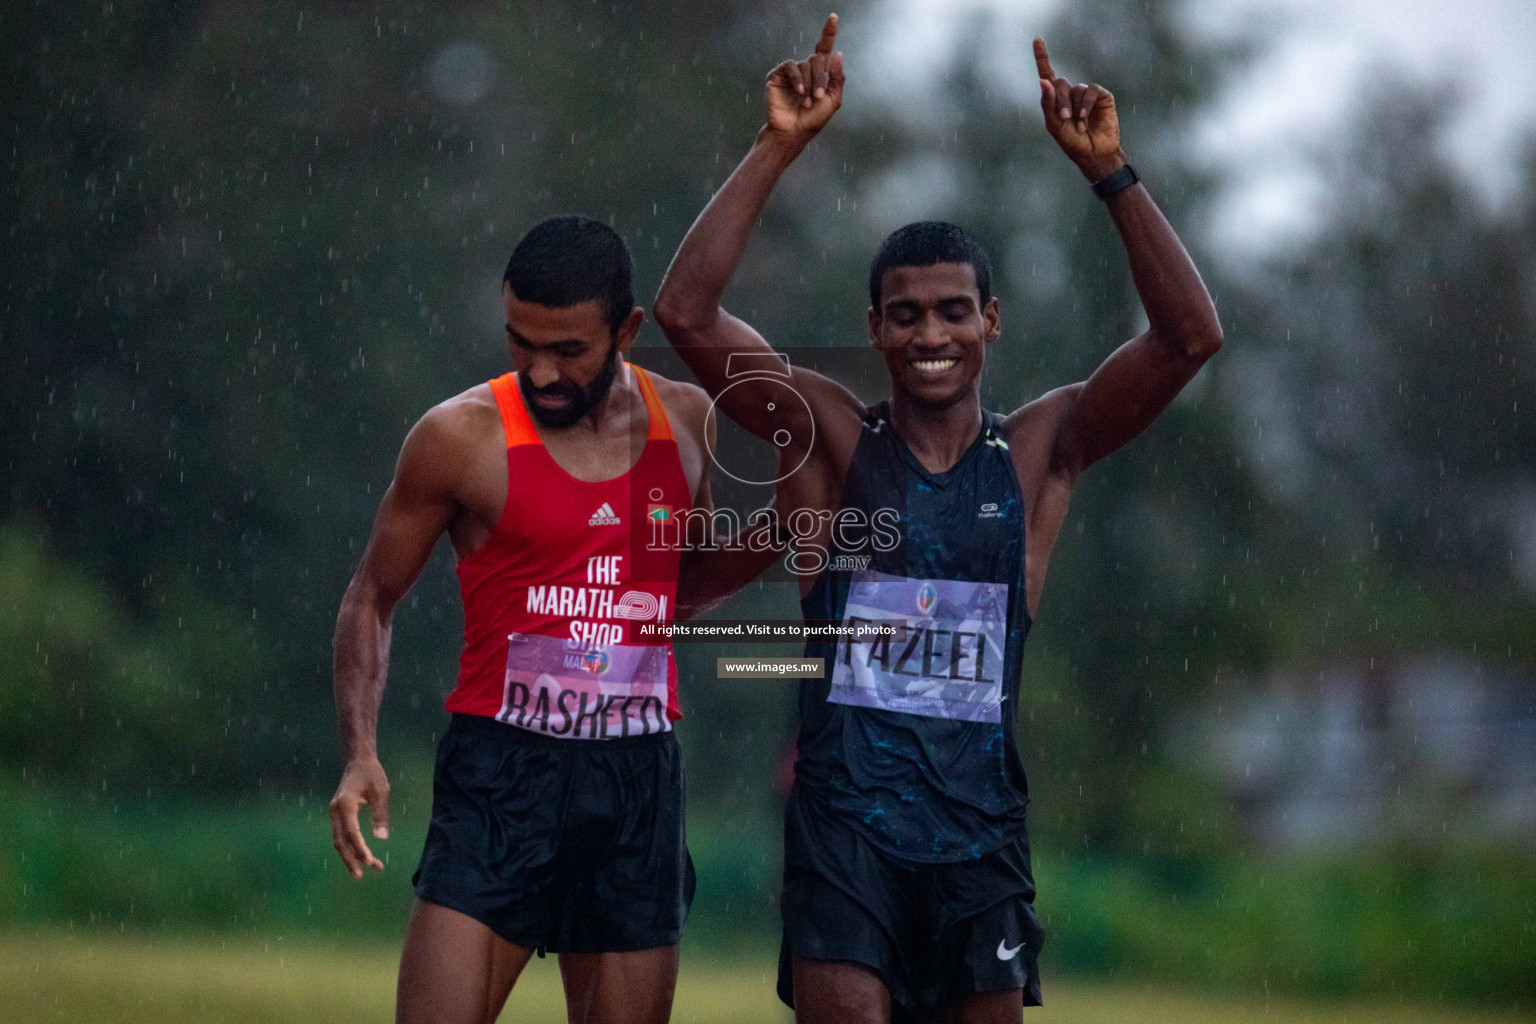 Photos from Day 2 of National Grand Prix 2019 on 5th October 2019 in Hulhumale', Male' Photos: Hassan Simah/images.mv